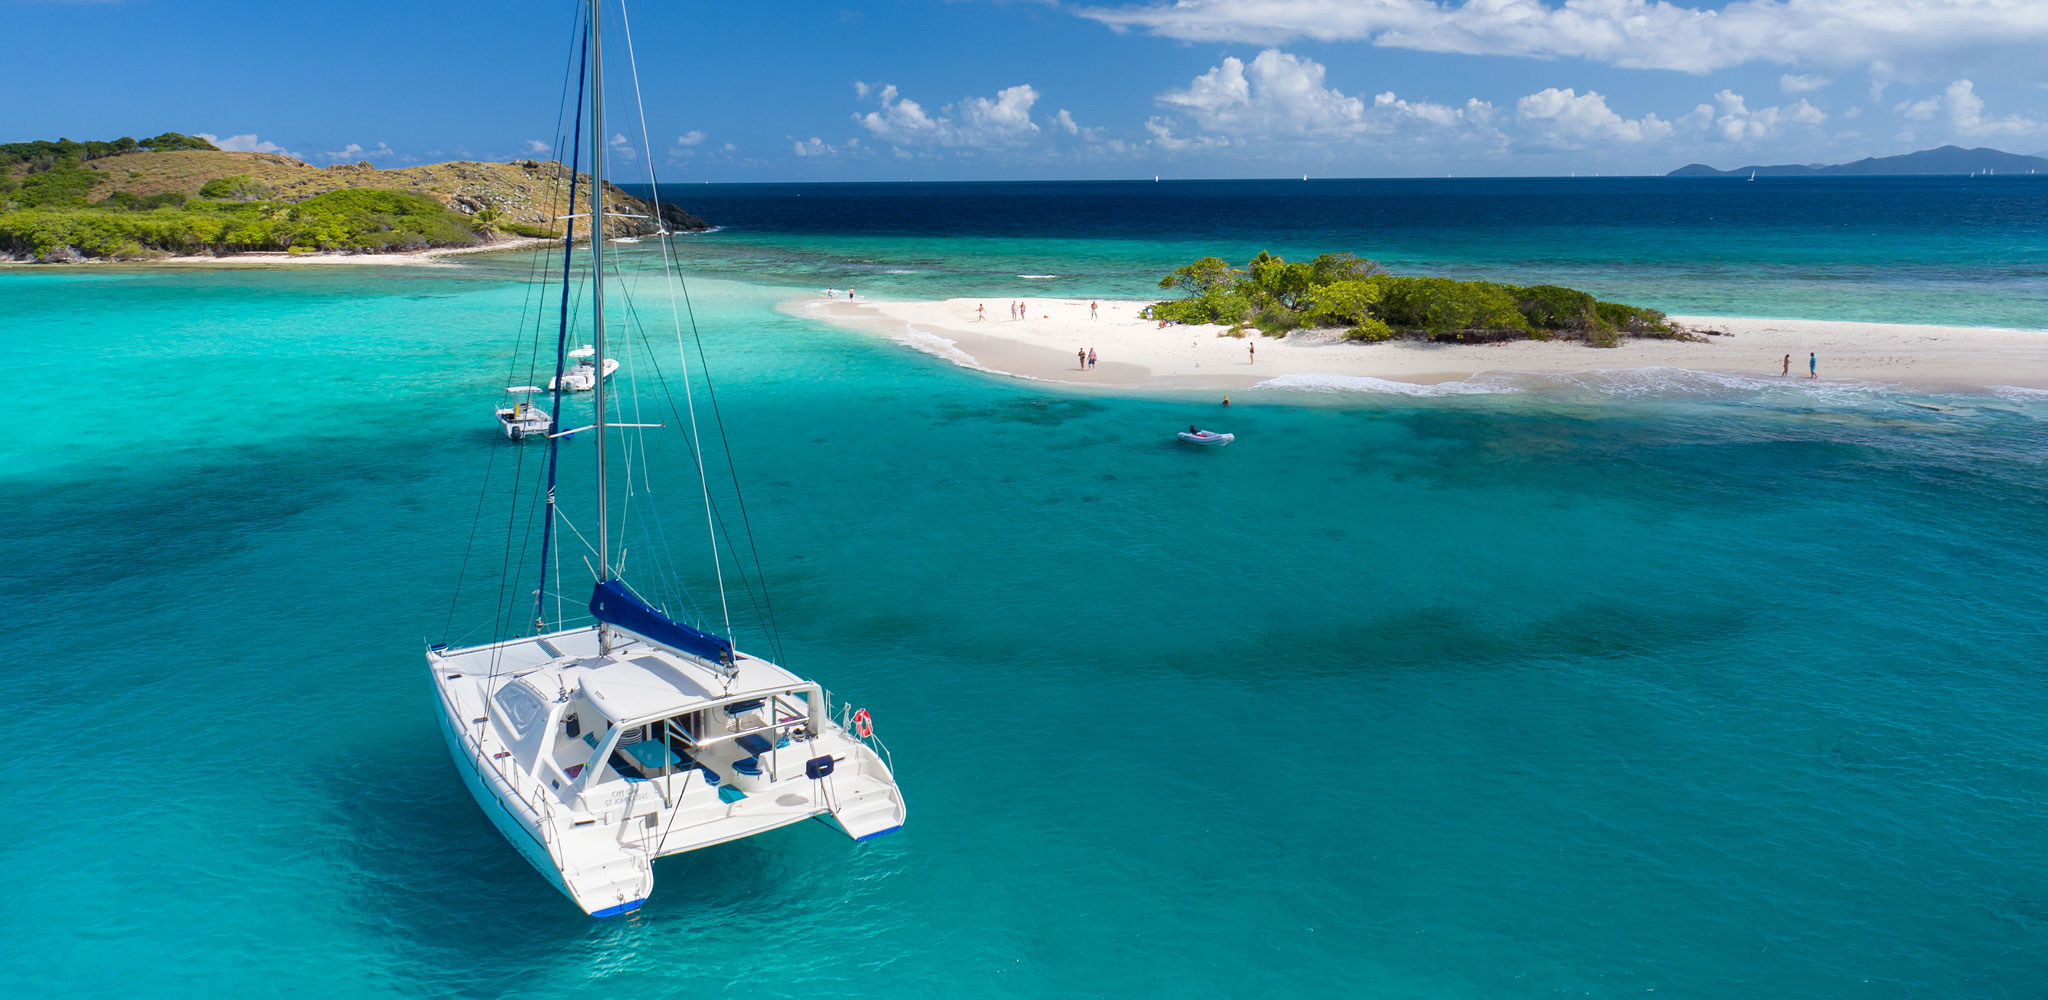 bvi yacht charters cost